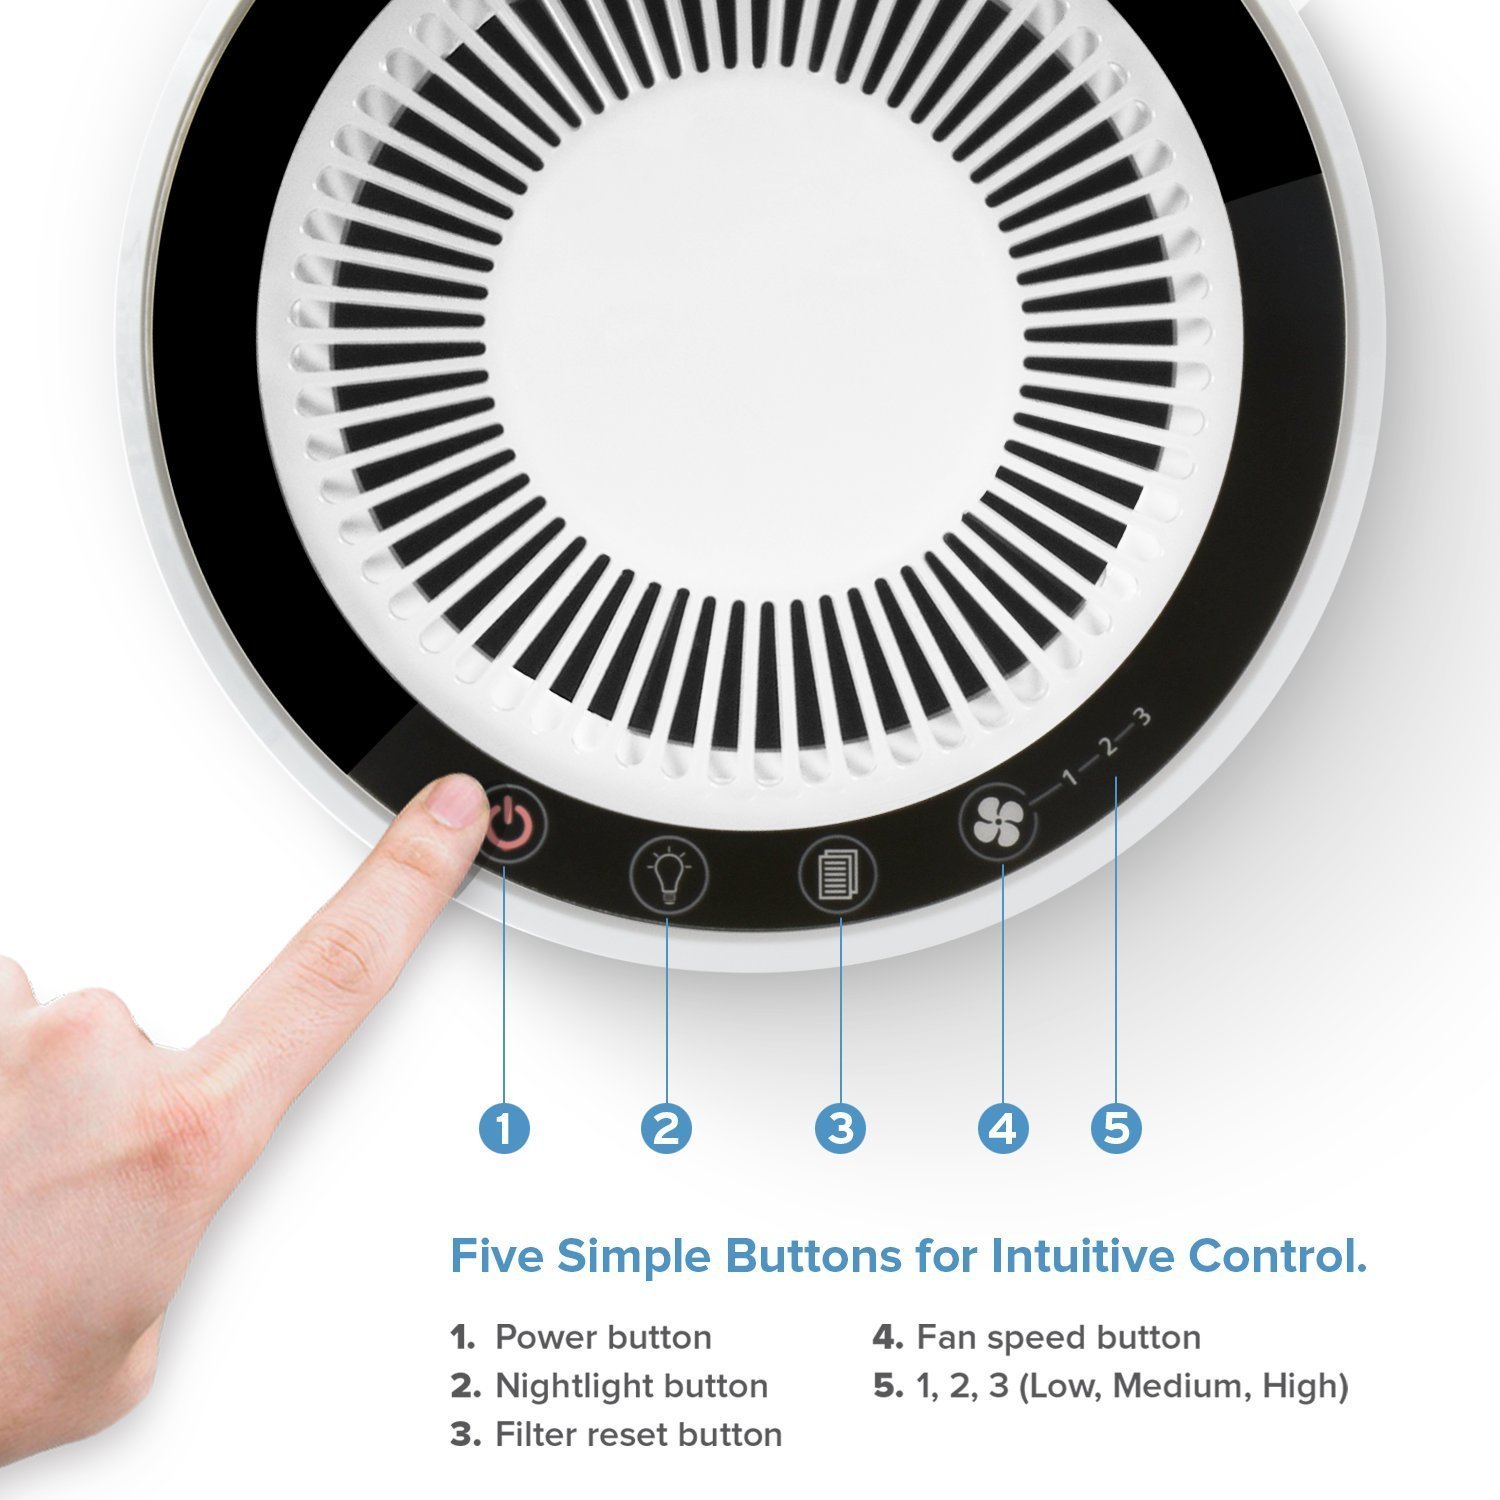 Levoit LV-H132 Air Purifier with True Hepa Filter for Smoke, Bacteria, and More - image 4 of 9